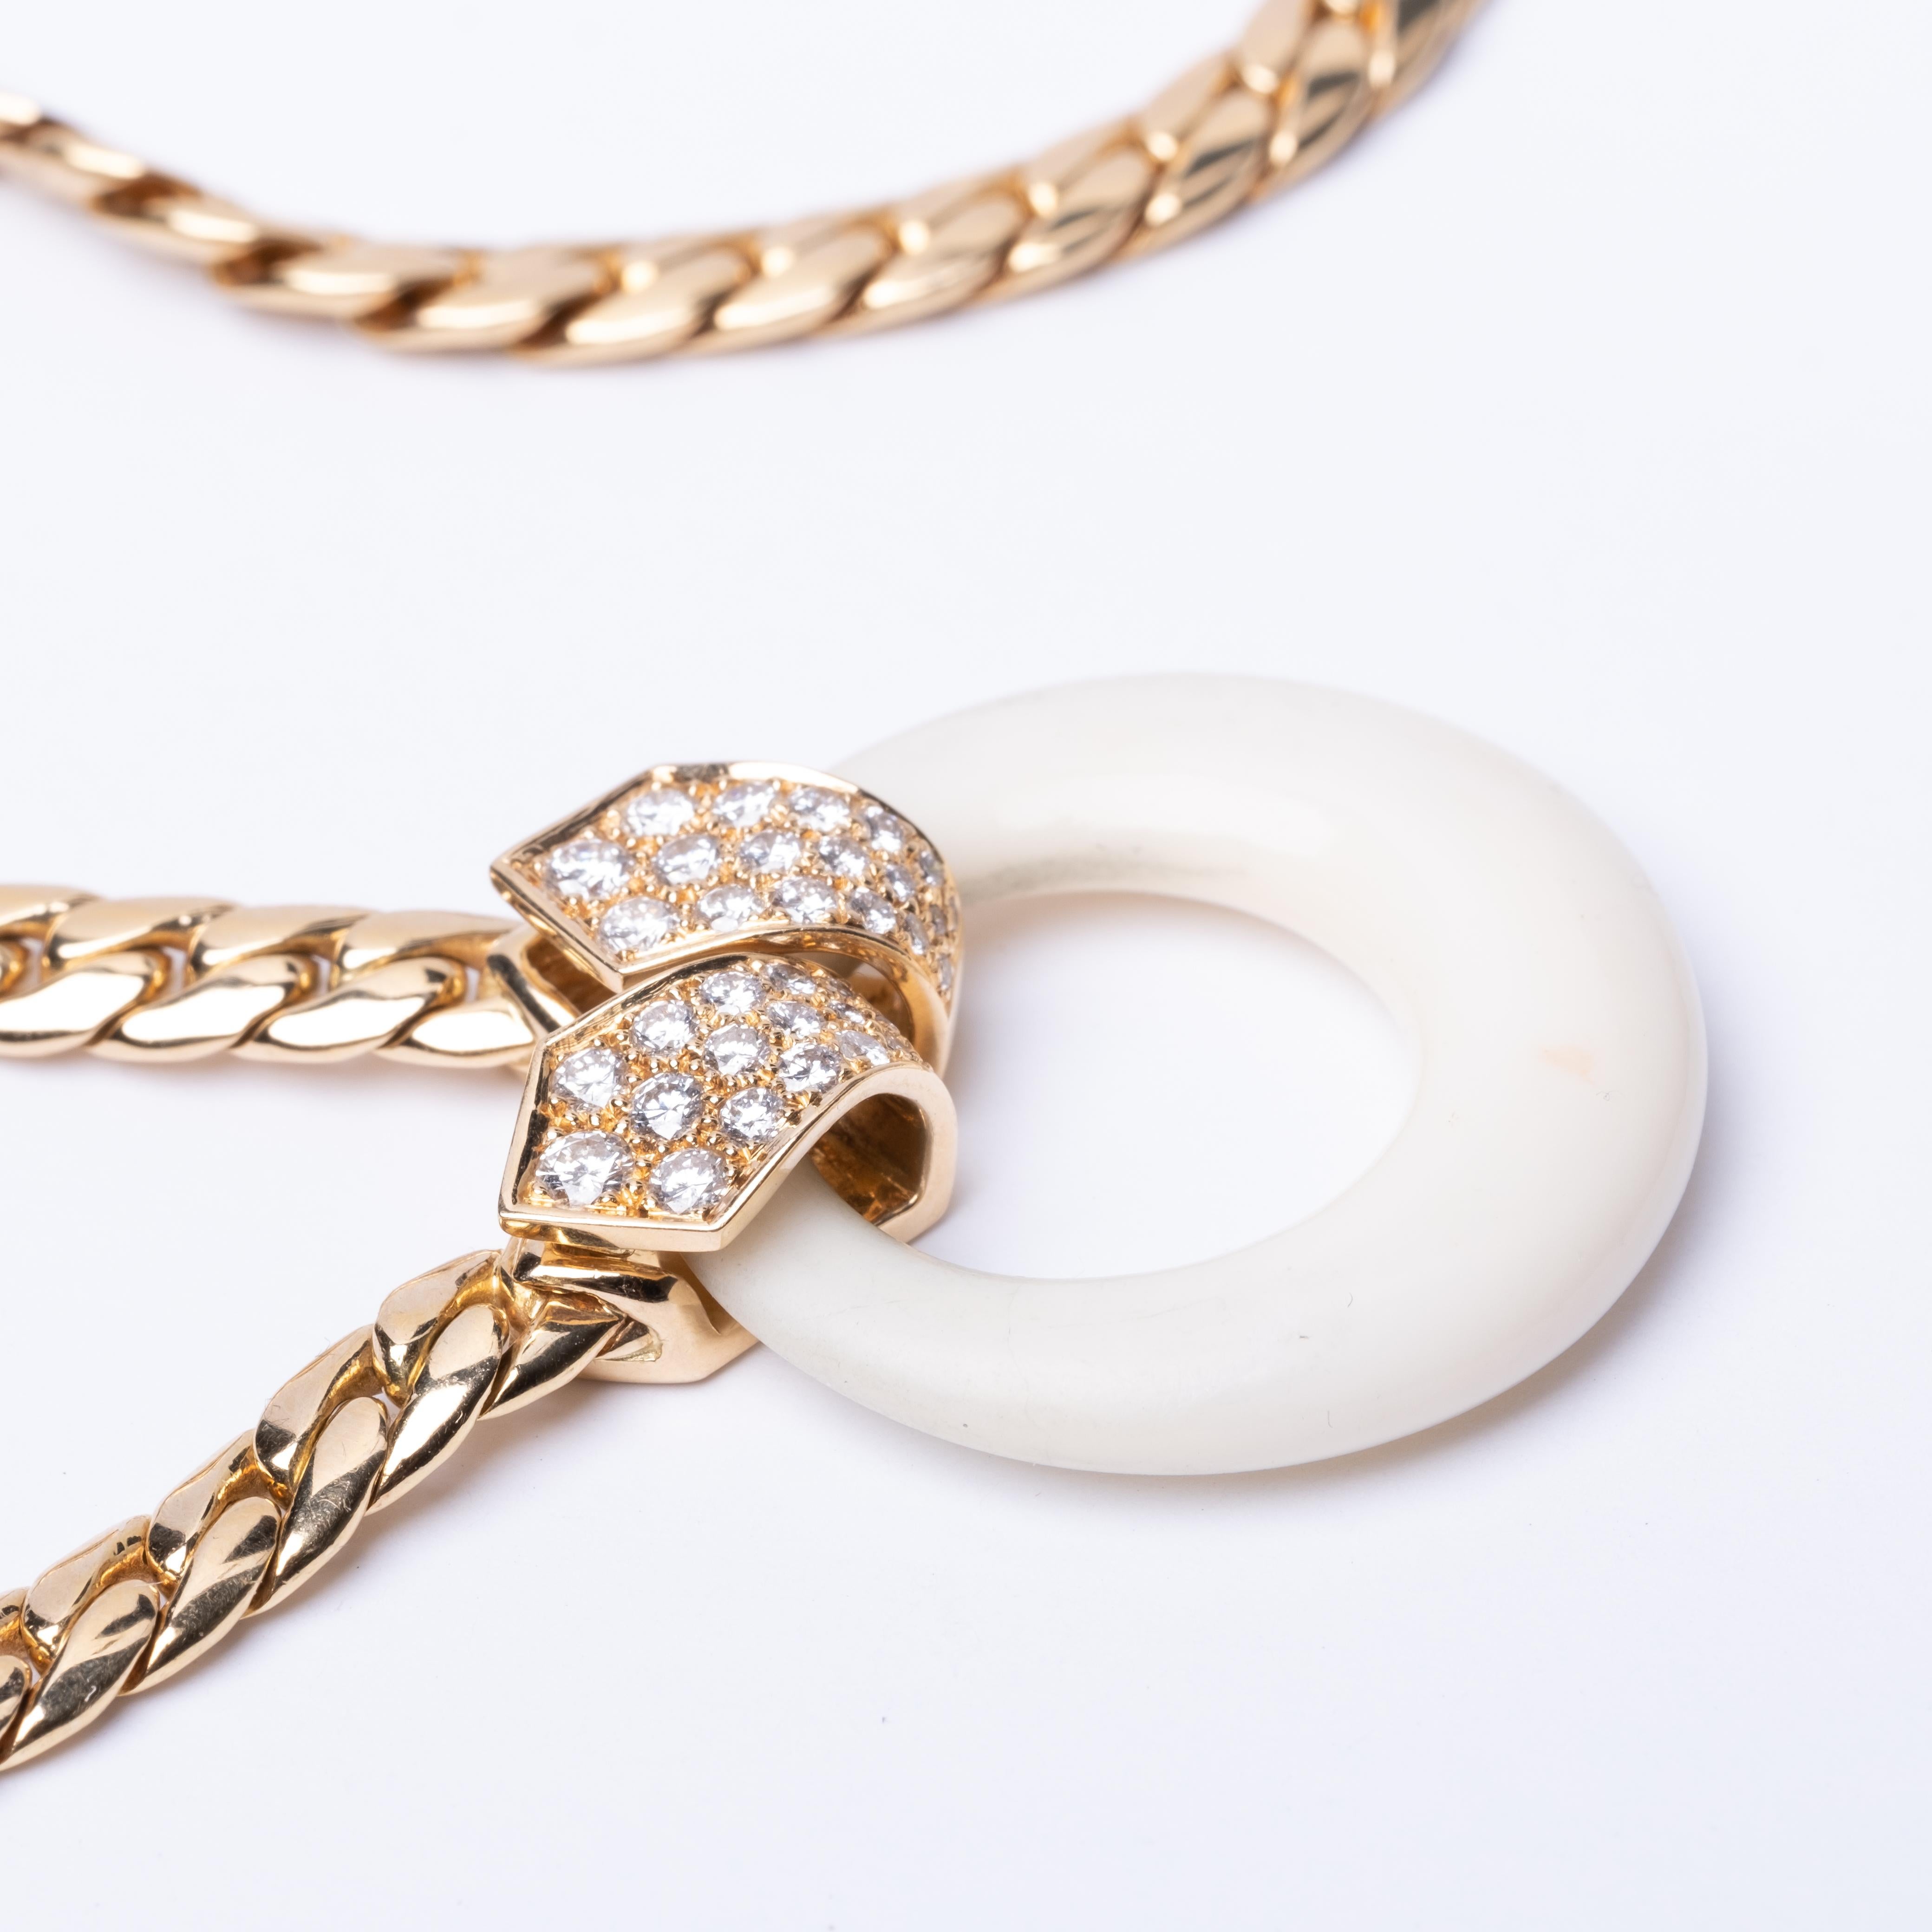 18K Van Cleef Arpels necklace Weighs 45.7 grams. It is presented with a 14K chain and a white coral pendant that measures 1.14 in length and 1.10 in width. The necklace is embellished with diamonds that feature E color and VVS clarity and amount to